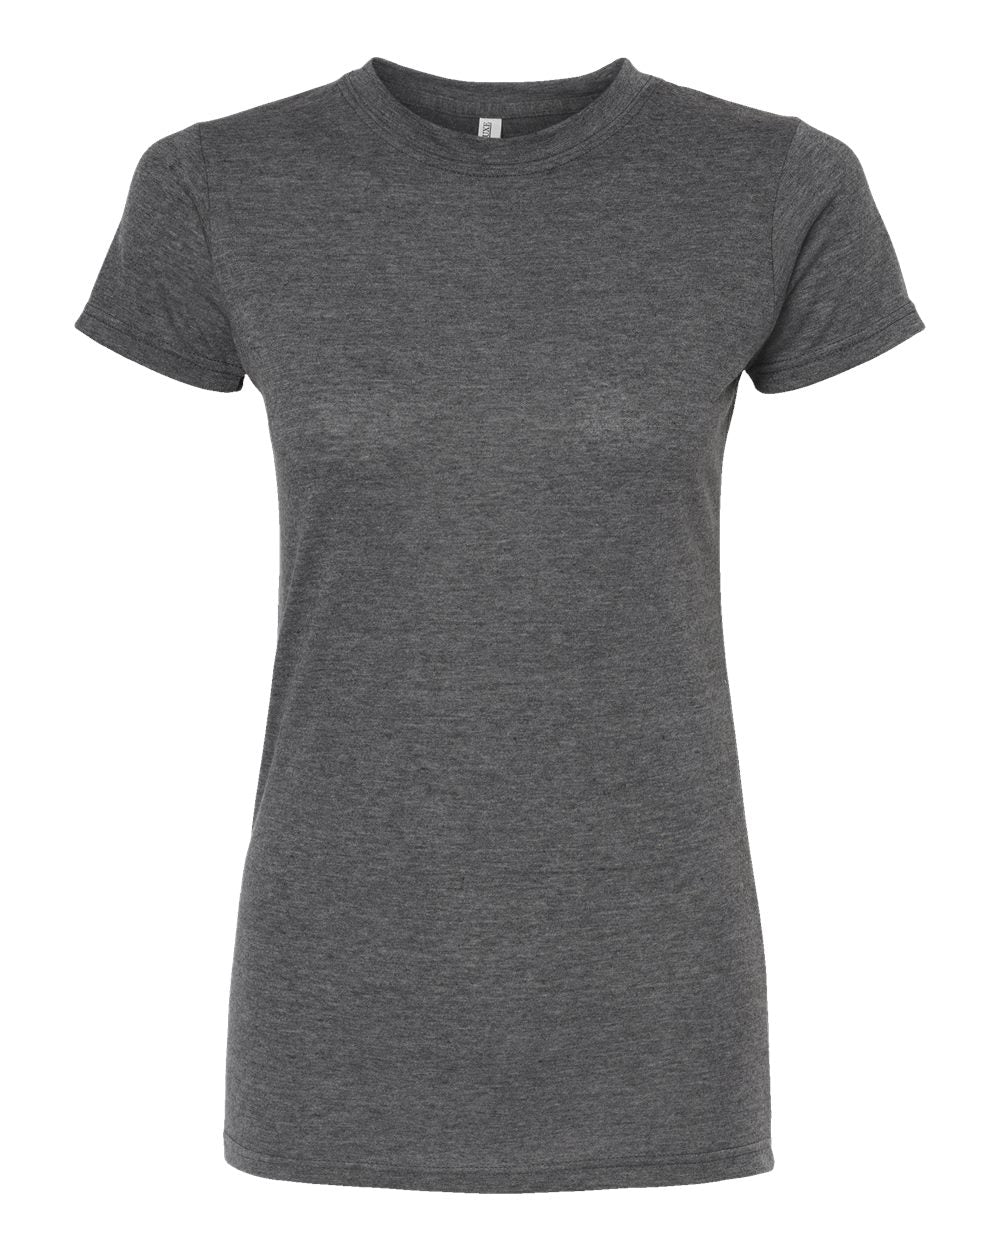 Deluxe Blend - Ladies T-Shirt - M&O 3540